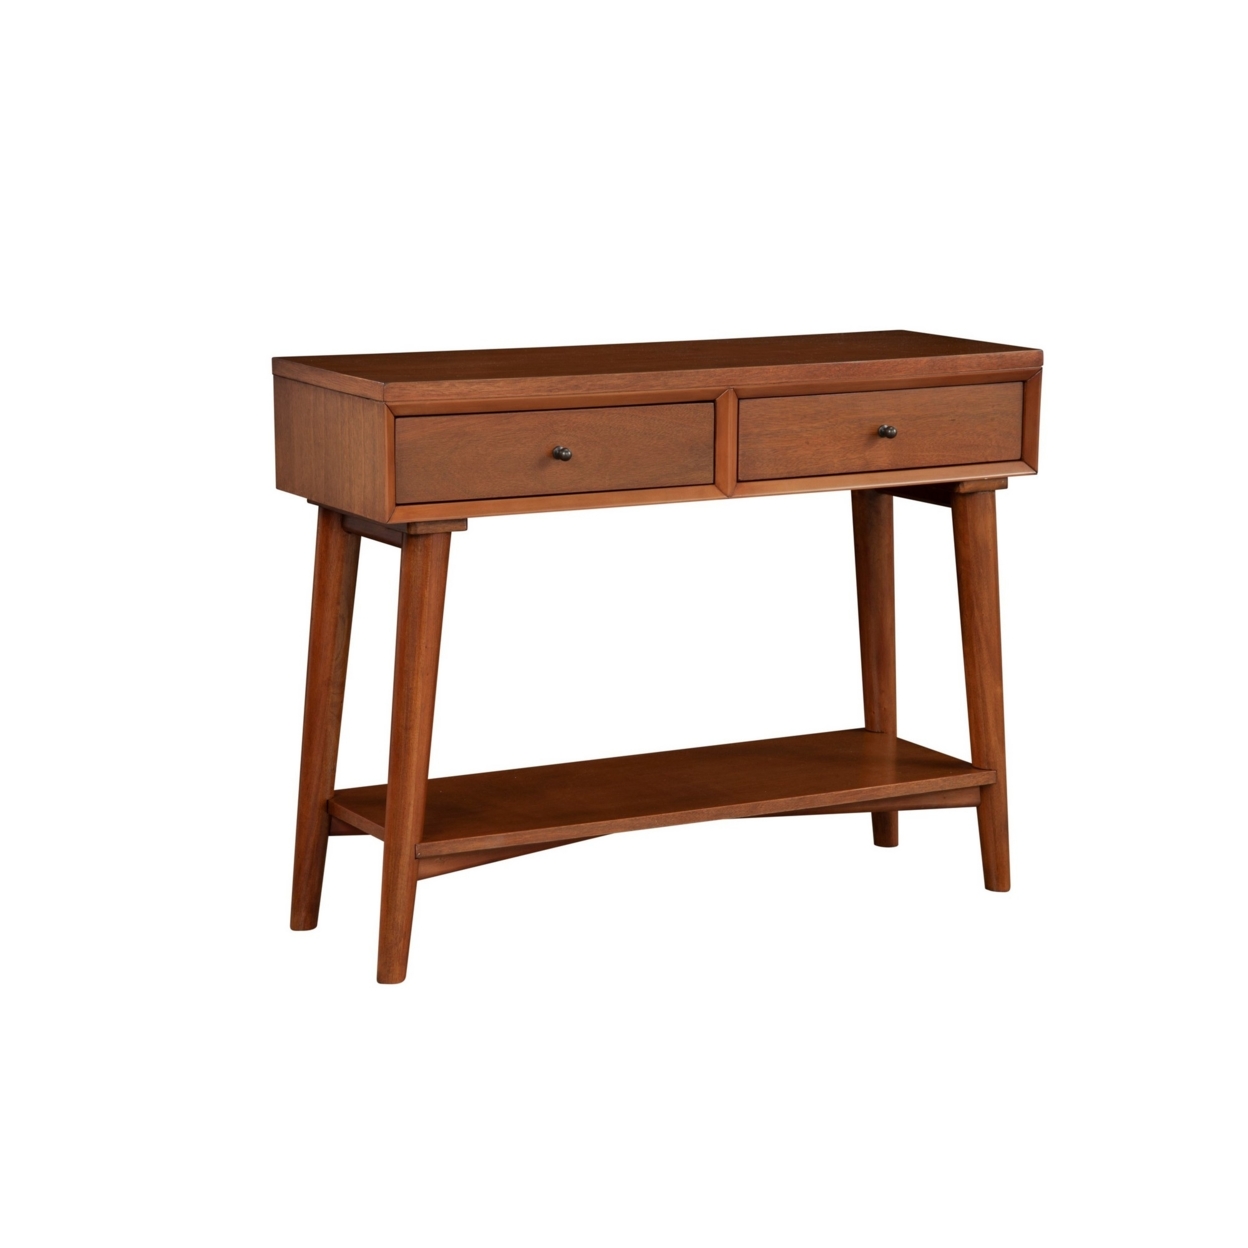 Console Table With 2 Drawers And Angled Legs, Brown- Saltoro Sherpi